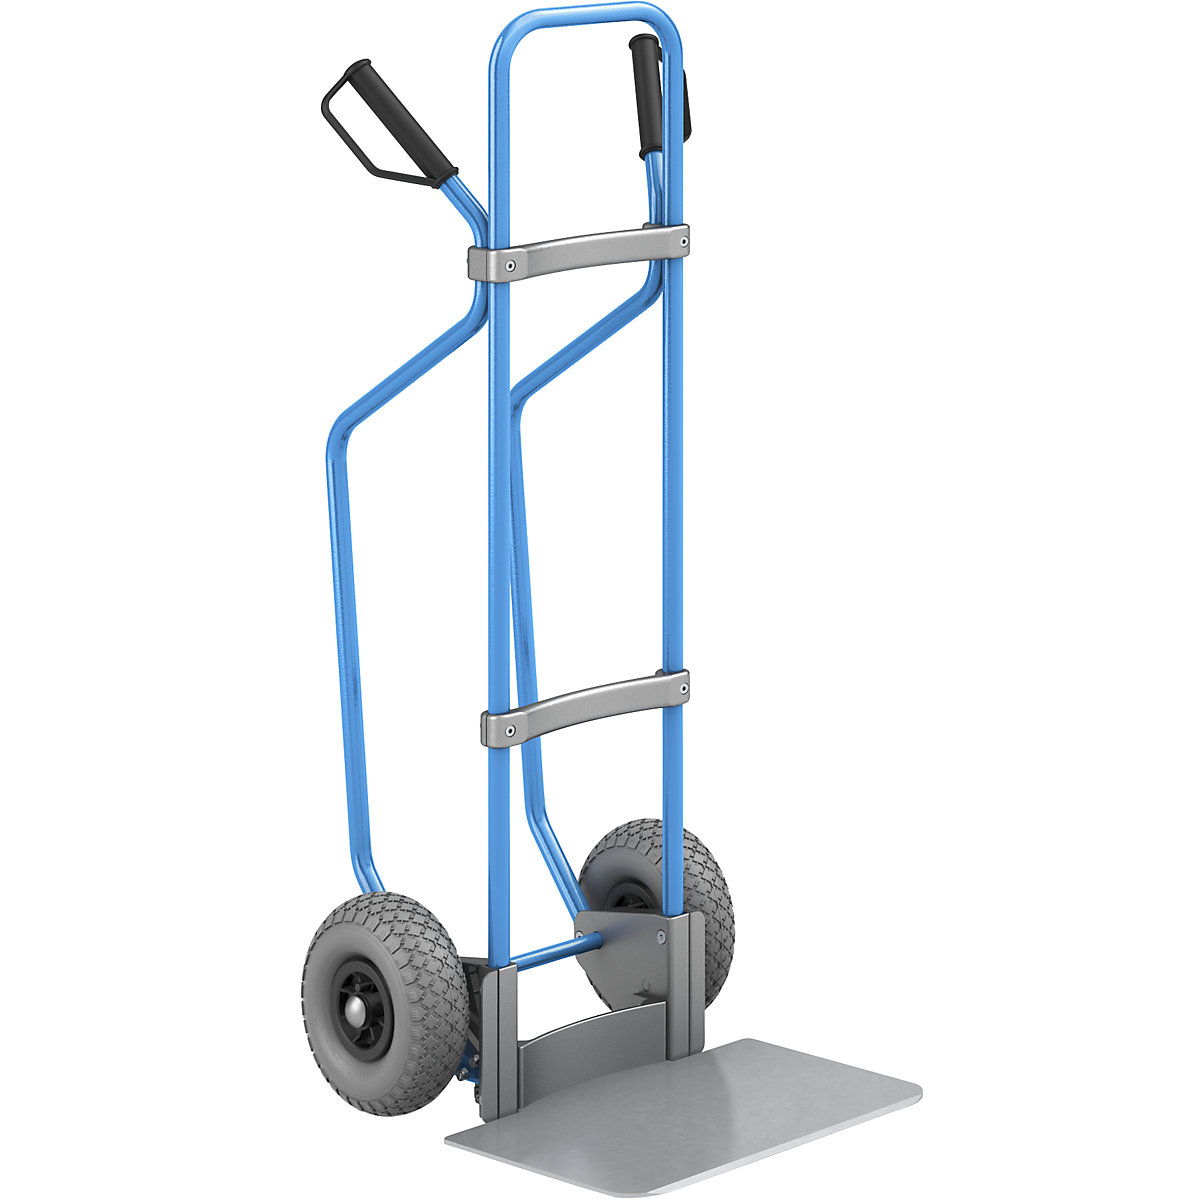 Sack truck with runners, blue – eurokraft pro, footplate WxD 450 x 350 mm, zinc plated, PU tyres-1